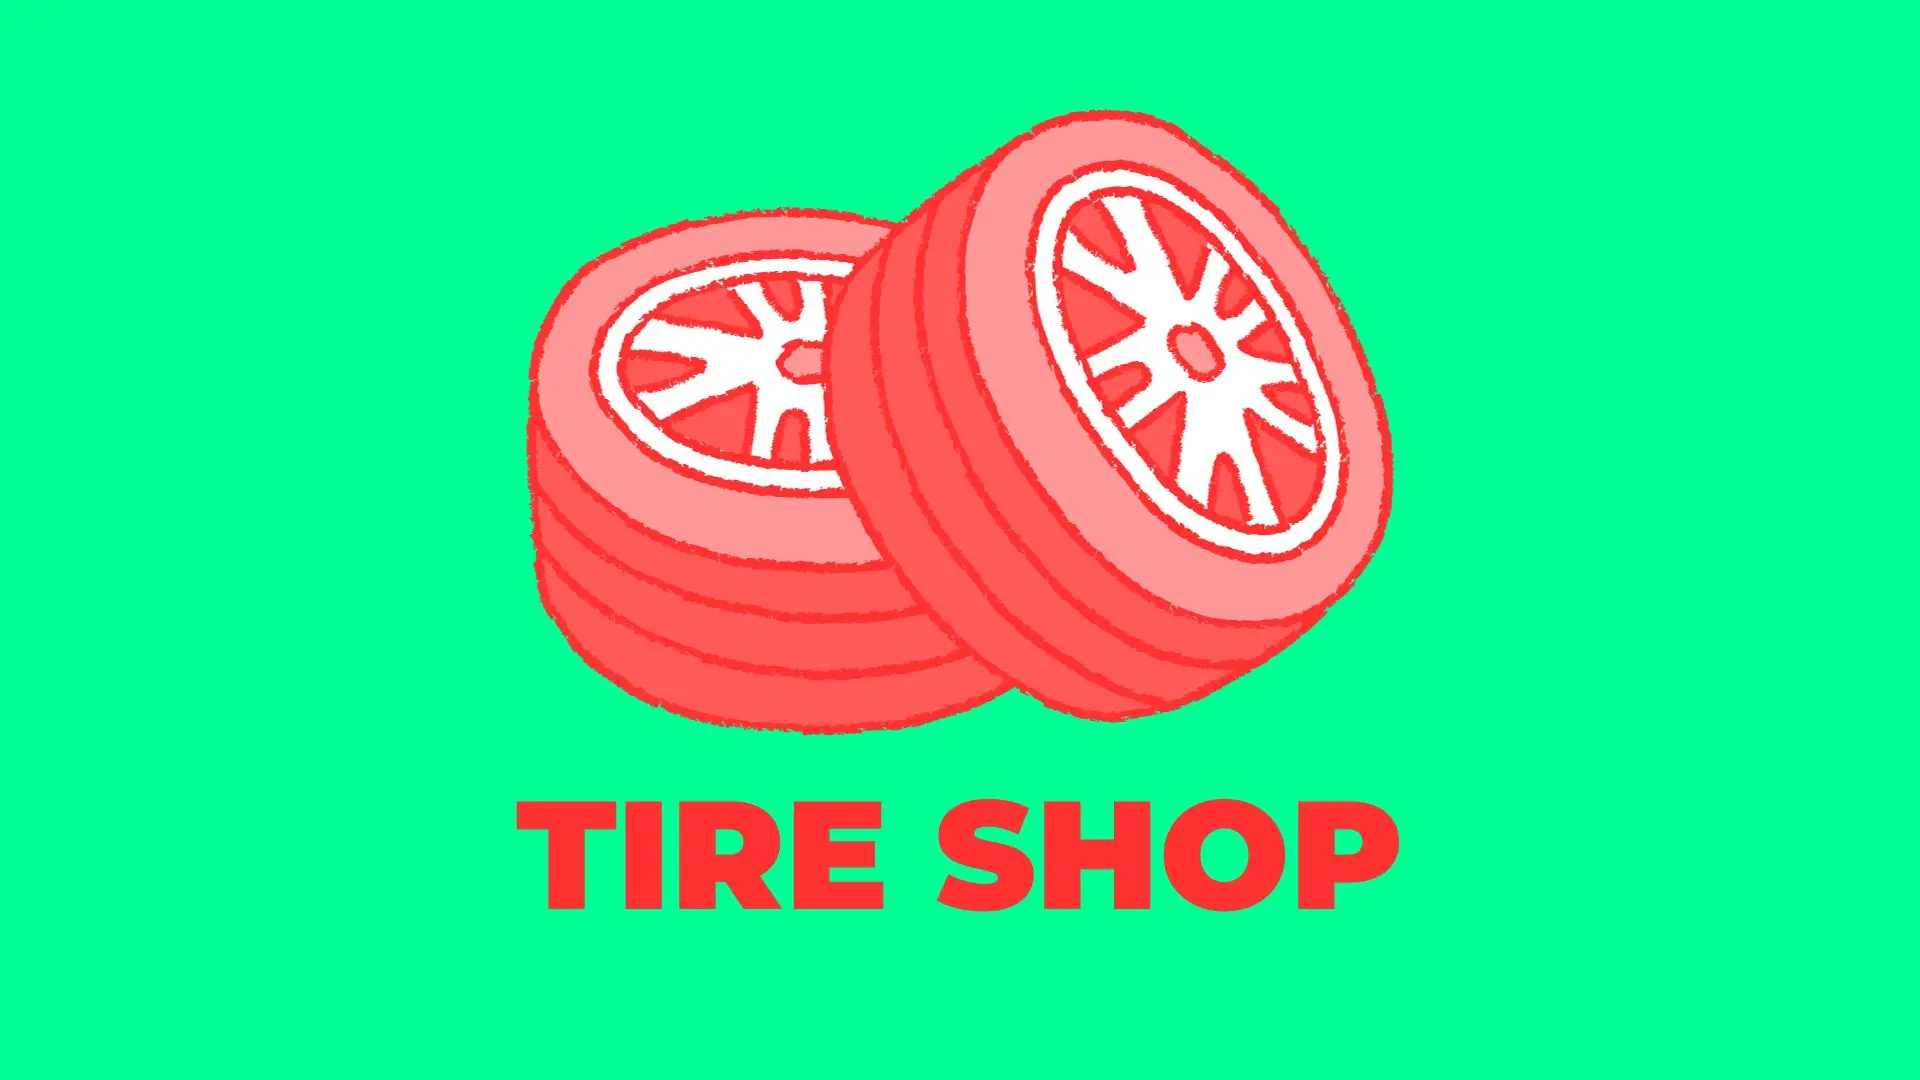 How to Start a Tire Shop: Complete Guide on Tire Shop Business